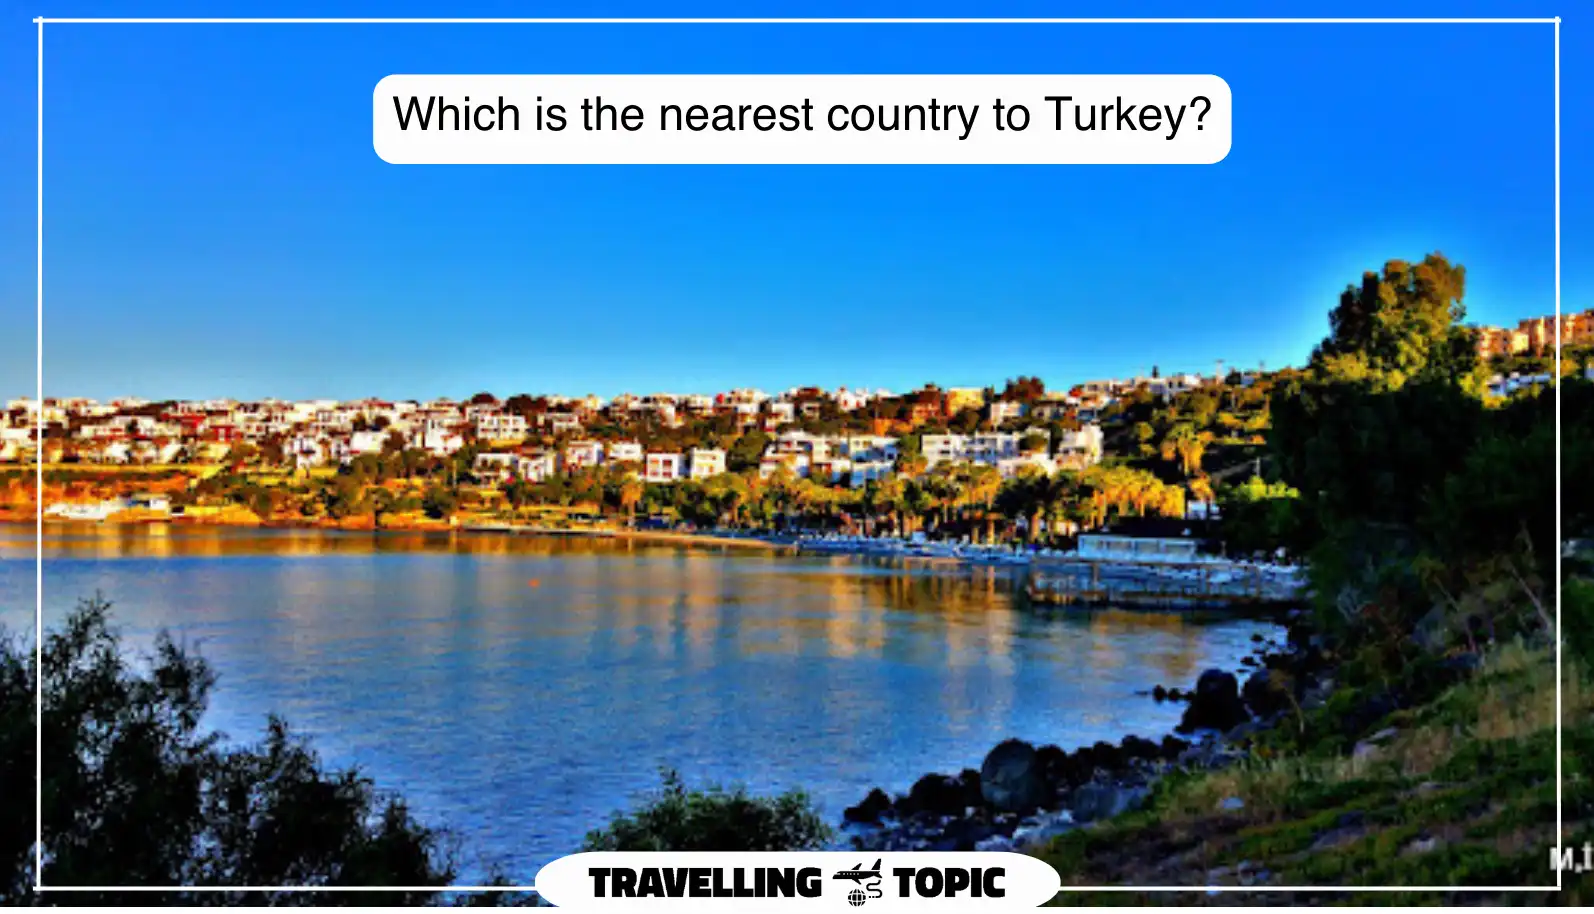 Which is the nearest country to Turkey